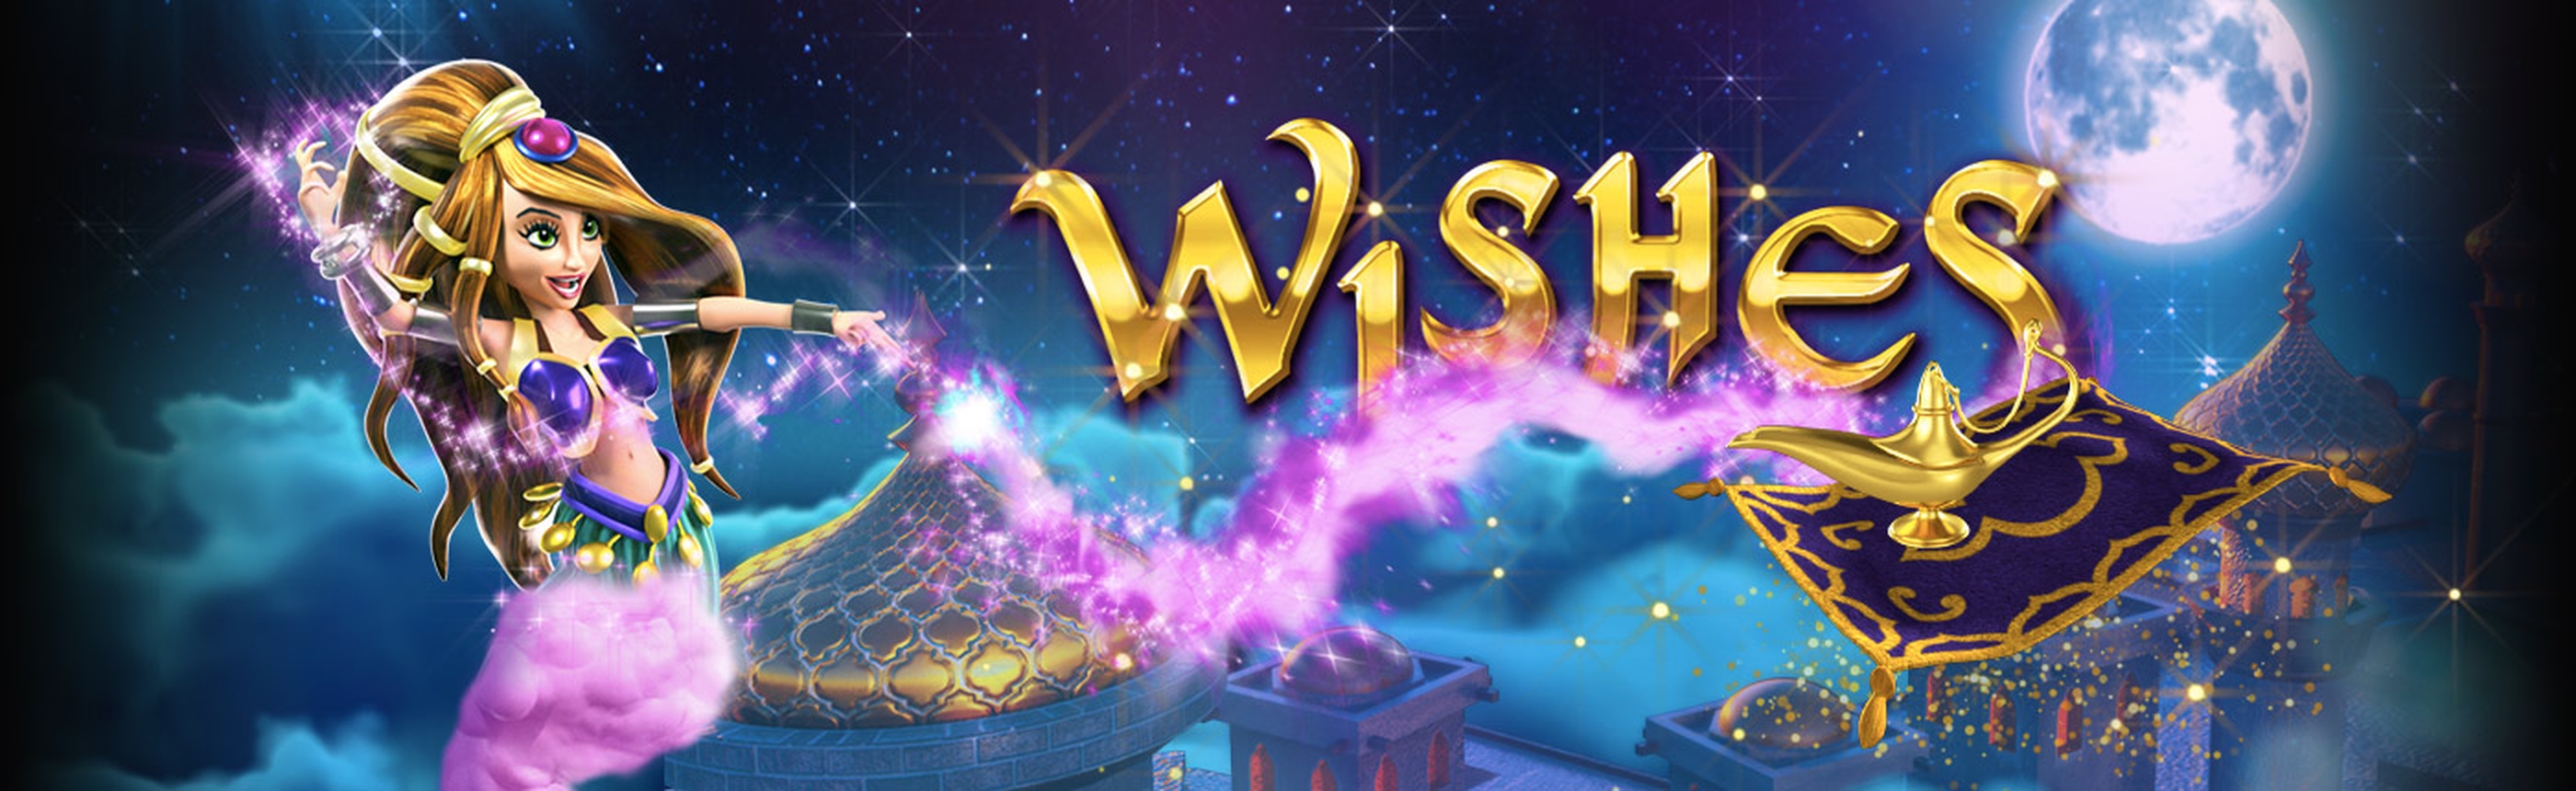 Wishes demo